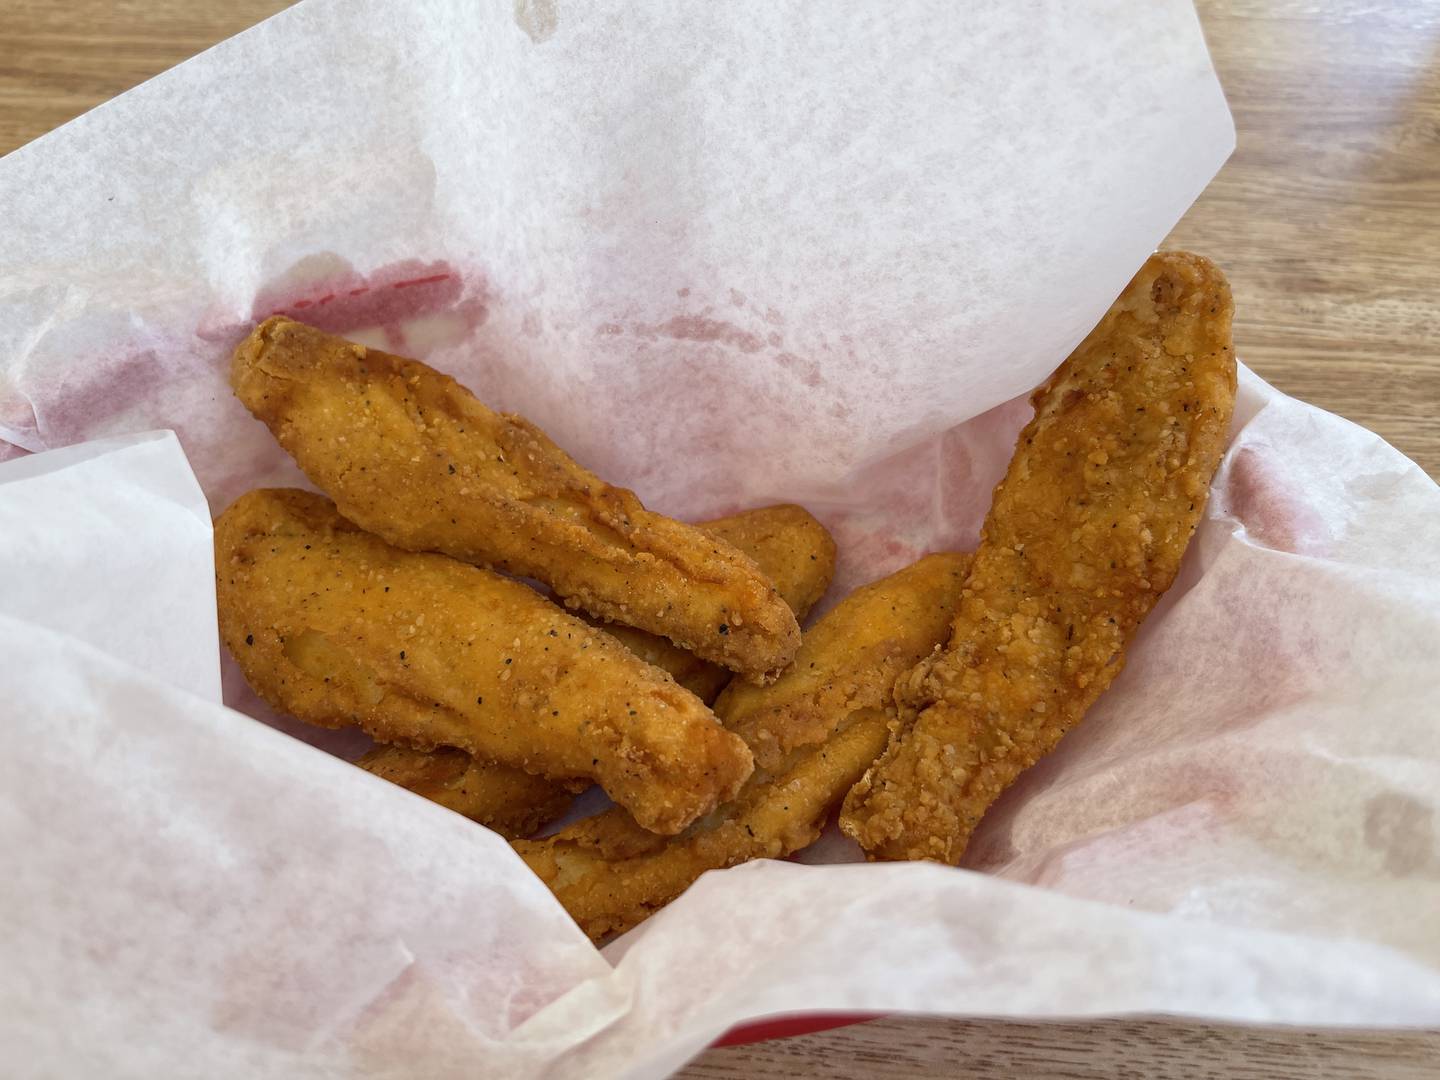 The chicken tenders have a crispy breading to them, but also remain juicy.